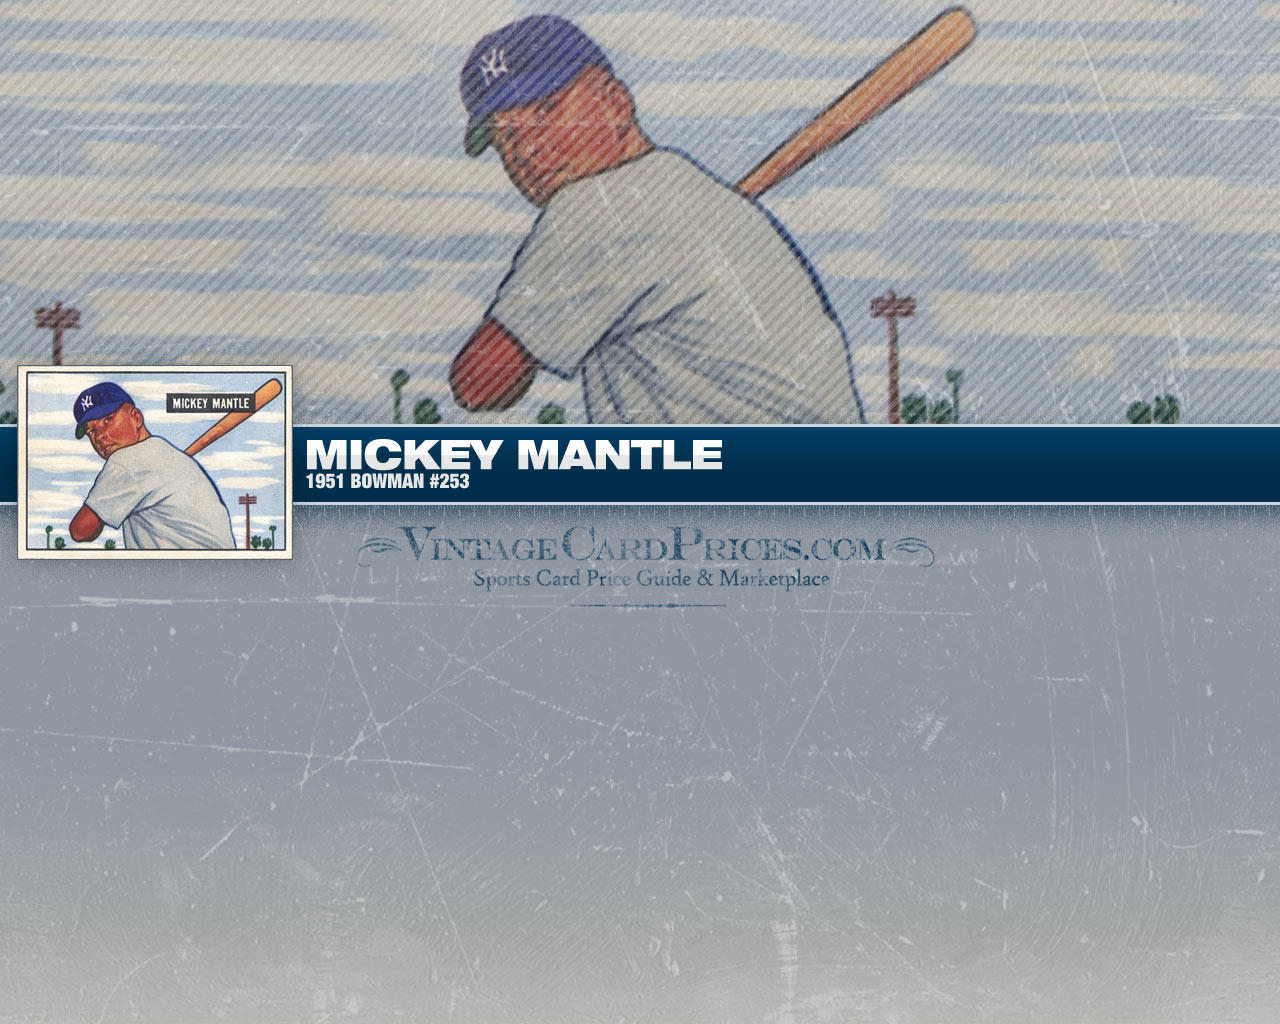 Mickey Mantle Wallpaper S Vintagecardprices Forums